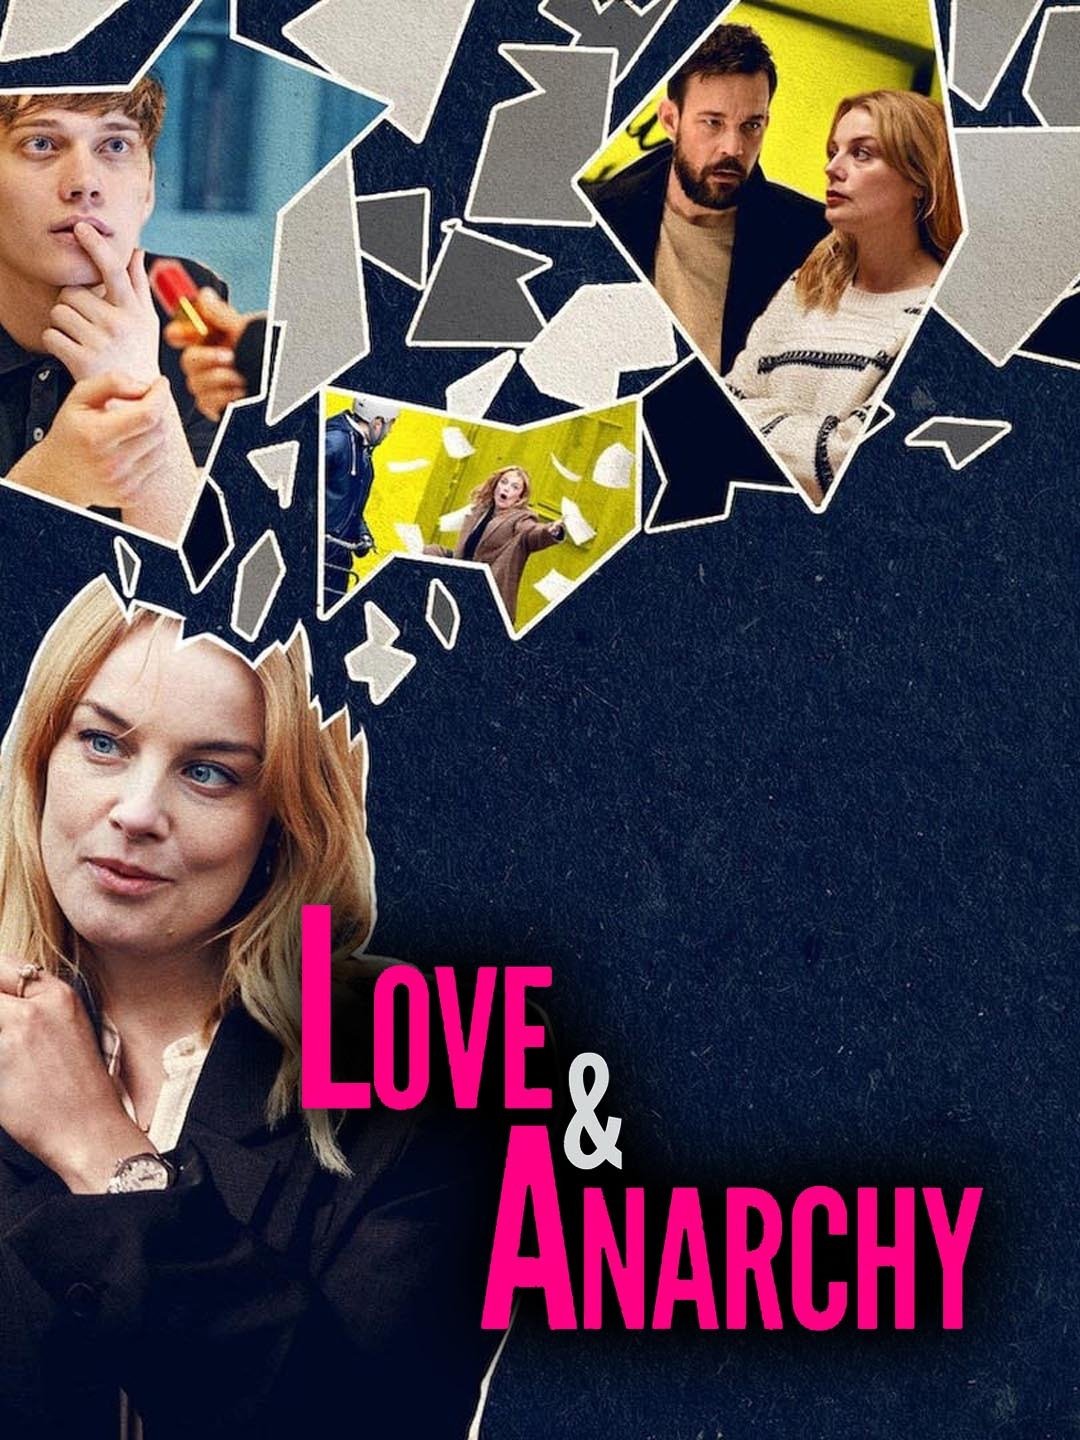 Sex Xxx Videos Collage Blood In Sleeping Night - Love & Anarchy - Rotten Tomatoes